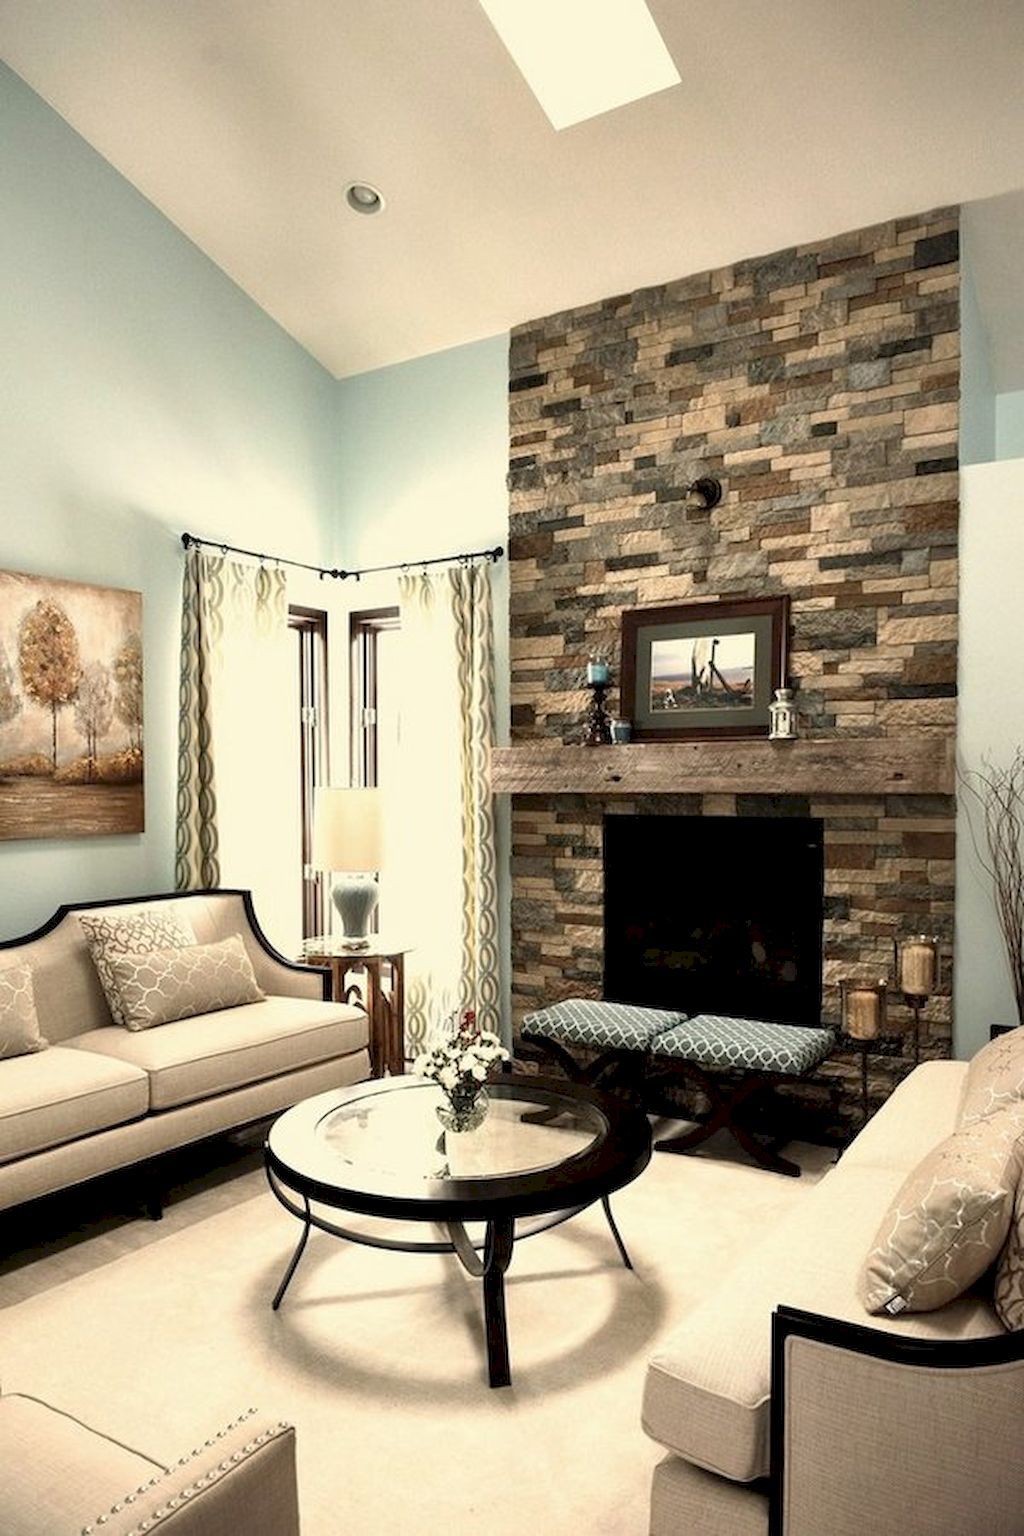 Refacing Fireplace with Stone Lovely 70 Gorgeous Apartment Fireplace Decorating Ideas